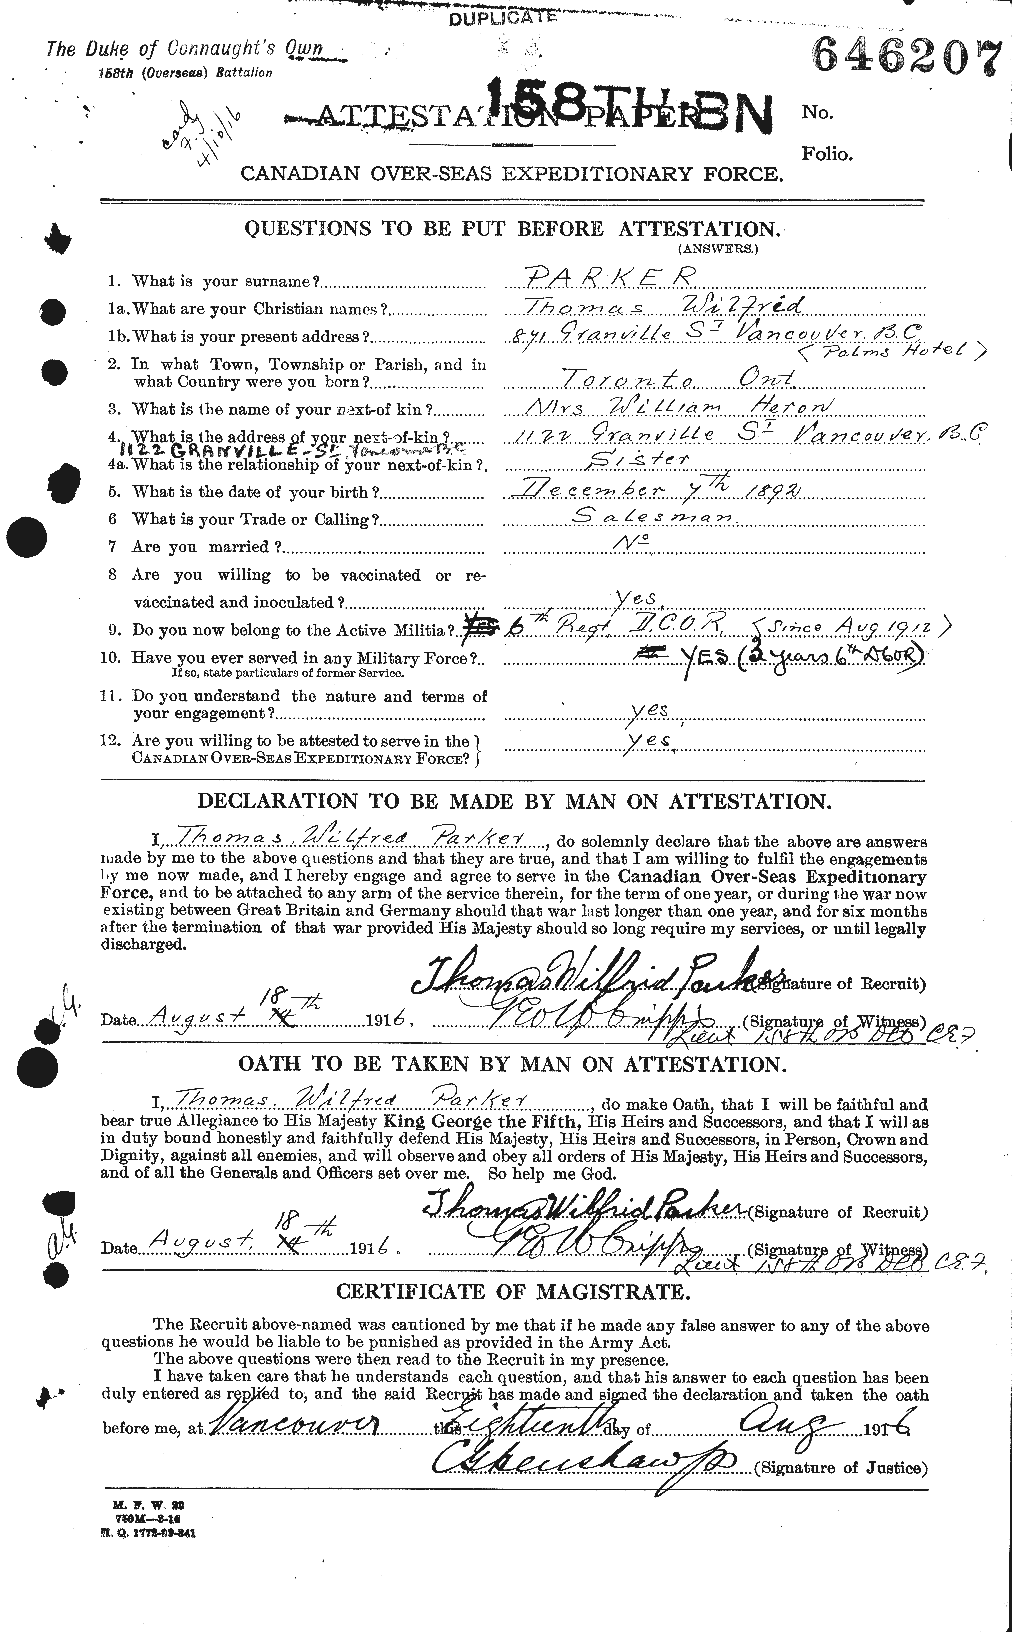 Personnel Records of the First World War - CEF 565671a